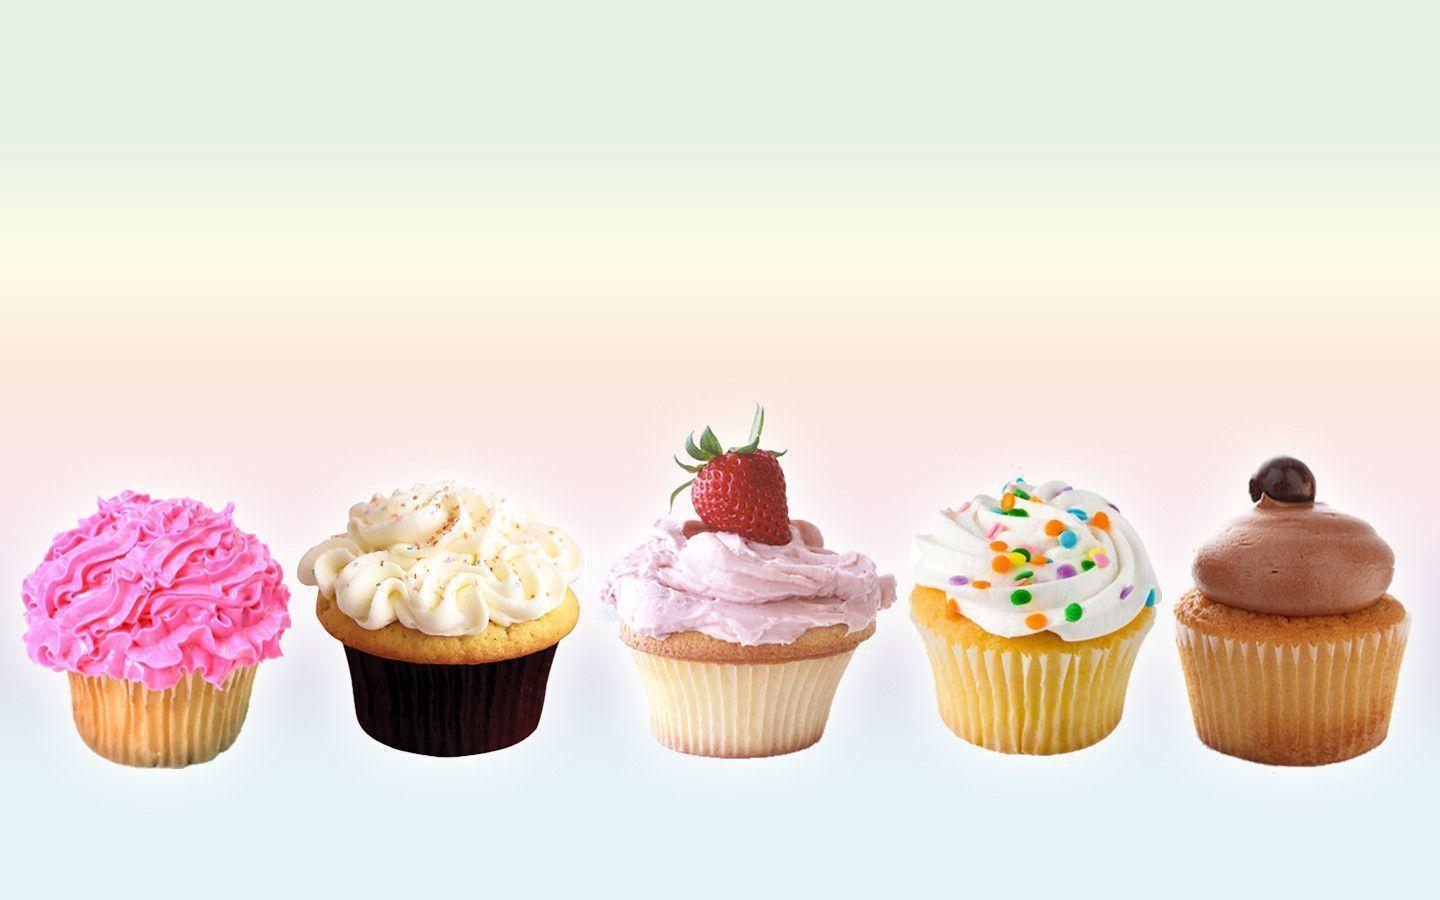 Download Cupcakes Free Wallpapers Hd Wallpapers Cflcpko « Free